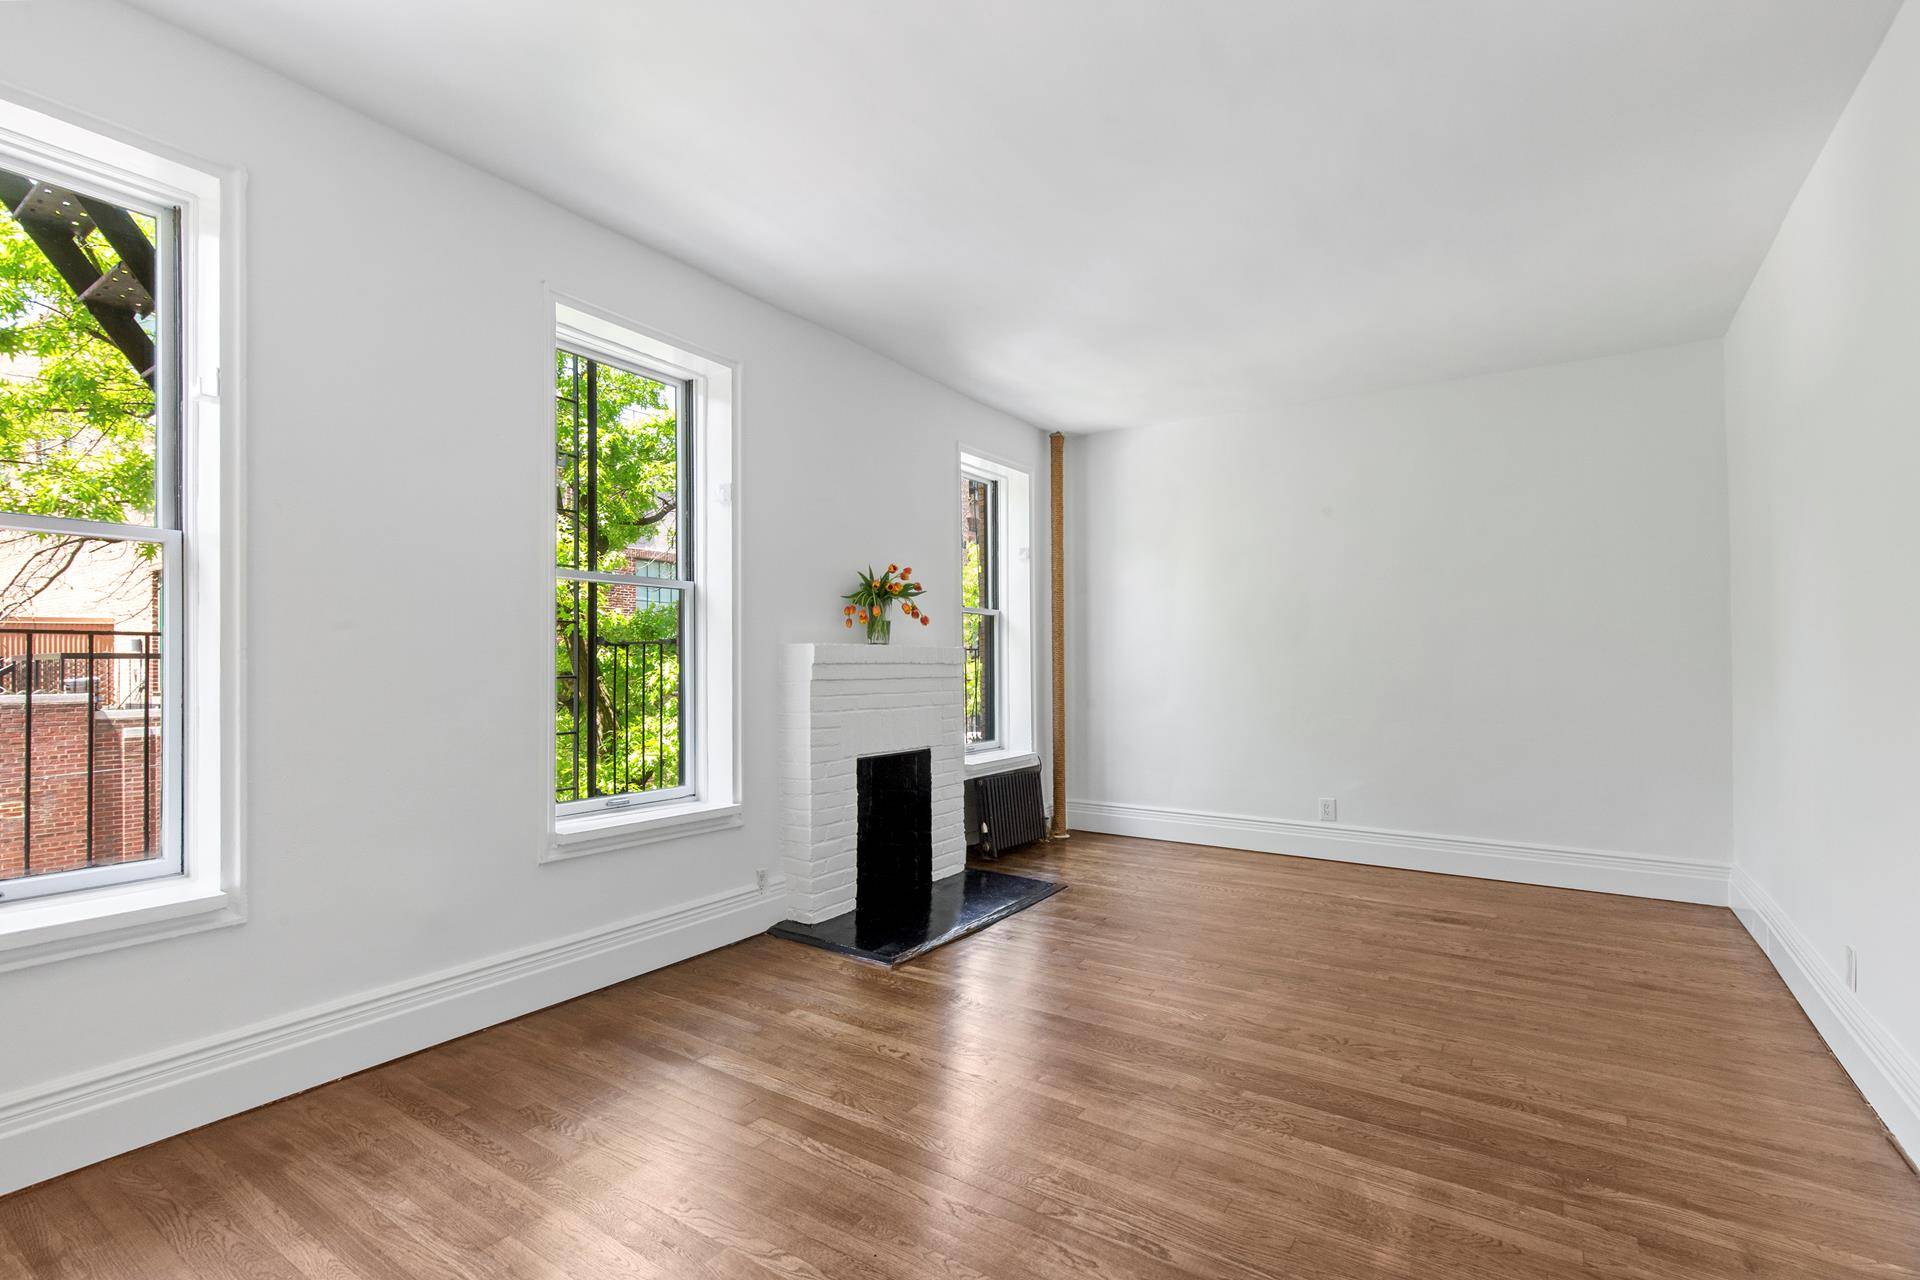 A quintessential pre war West Village studio in the most desired neighborhood.